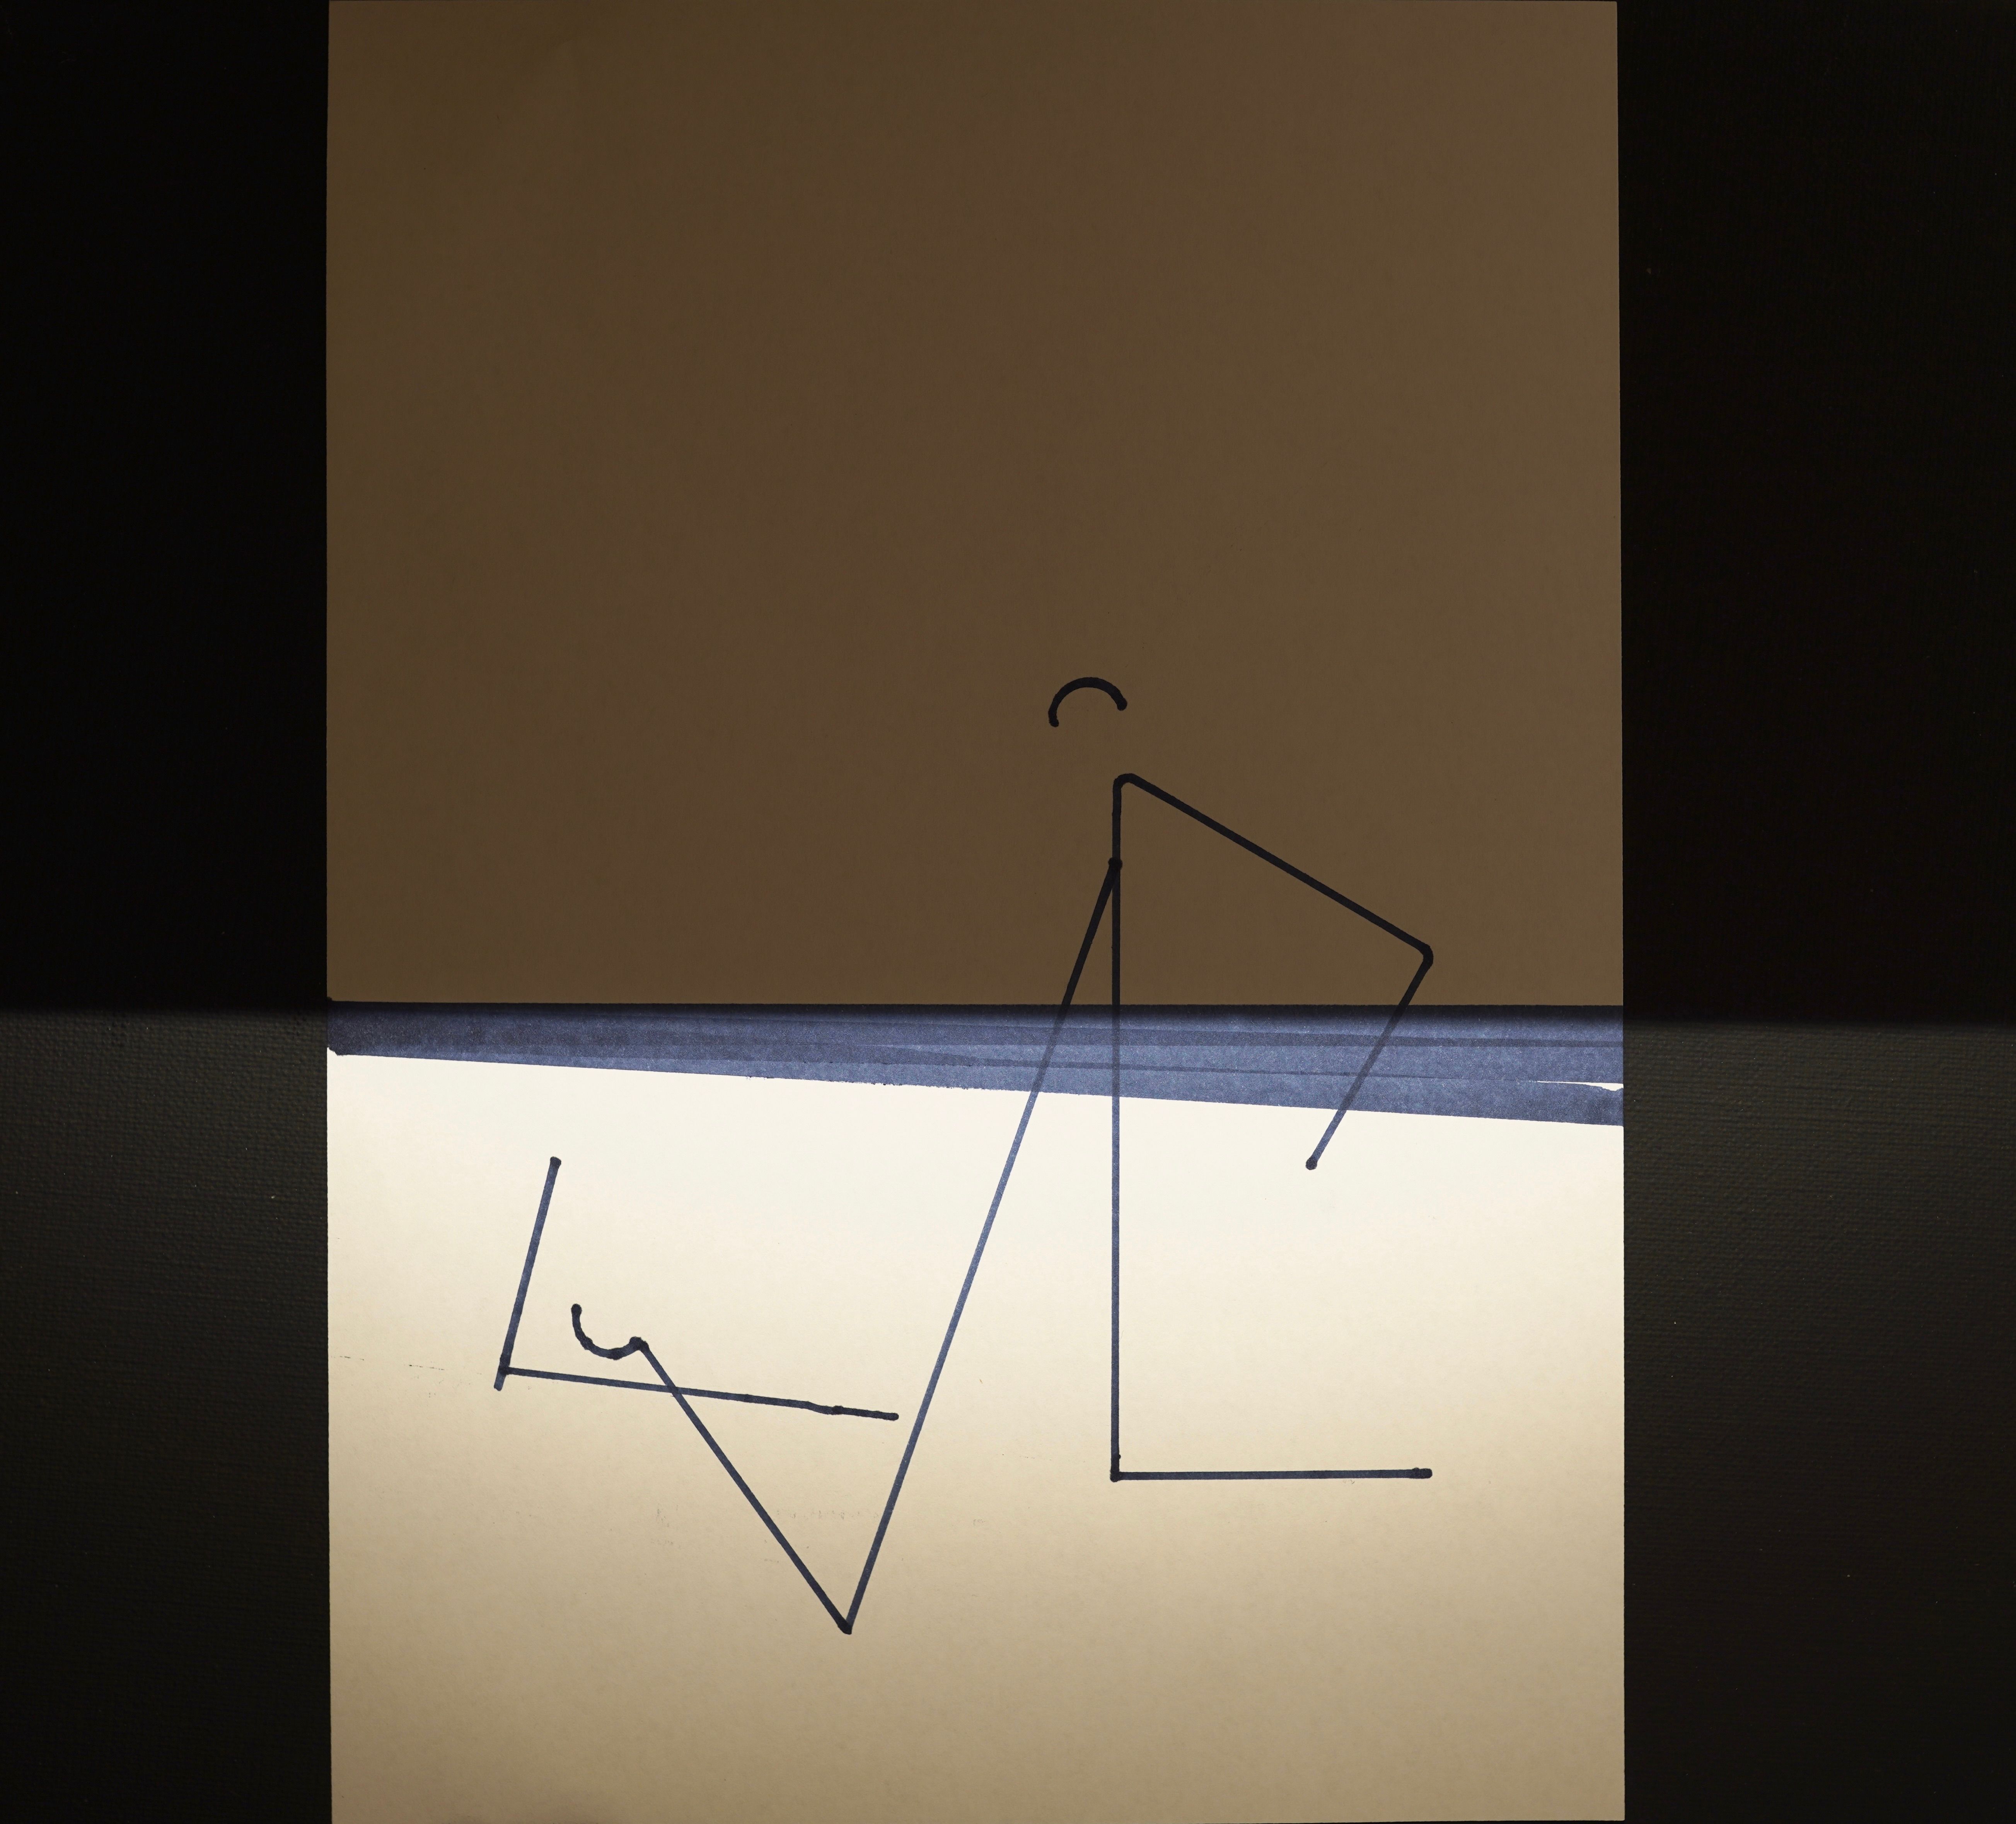 Rafal Bujnowski, Shadow on Paper, 2022, detail of ink on paper and digital image on a screen, 29.7 x 21 cm (11 5/8 x 8 1/4 in.) (each drawing), overall dimensions variable 